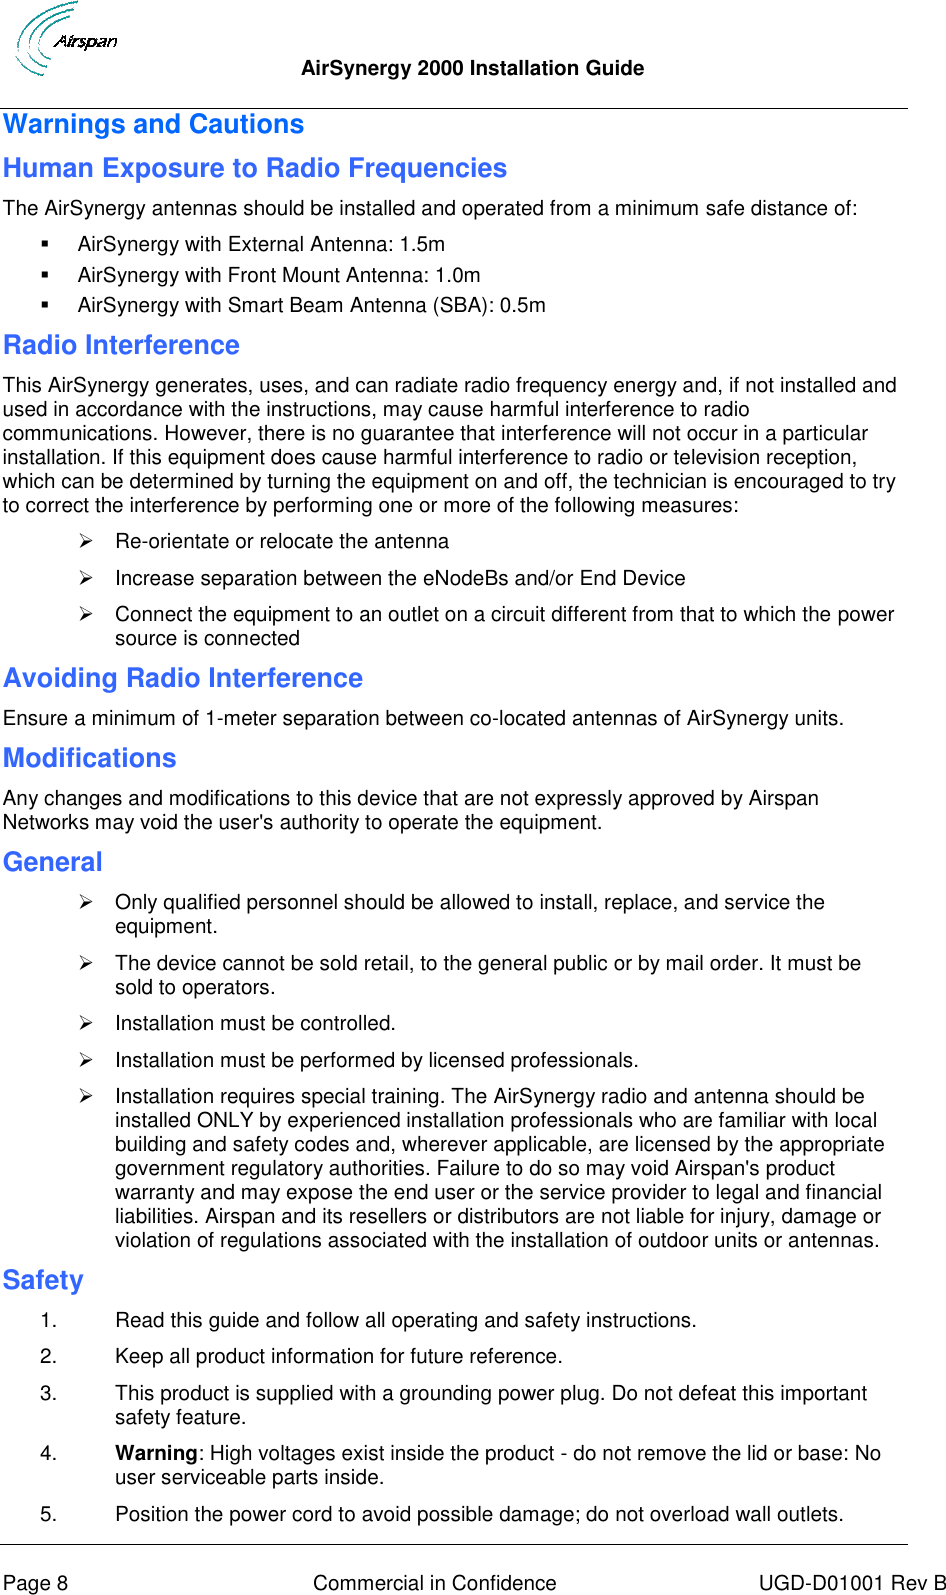  AirSynergy 2000 Installation Guide     Page 8  Commercial in Confidence  UGD-D01001 Rev B Warnings and Cautions Human Exposure to Radio Frequencies The AirSynergy antennas should be installed and operated from a minimum safe distance of:   AirSynergy with External Antenna: 1.5m   AirSynergy with Front Mount Antenna: 1.0m   AirSynergy with Smart Beam Antenna (SBA): 0.5m  Radio Interference This AirSynergy generates, uses, and can radiate radio frequency energy and, if not installed and used in accordance with the instructions, may cause harmful interference to radio communications. However, there is no guarantee that interference will not occur in a particular installation. If this equipment does cause harmful interference to radio or television reception, which can be determined by turning the equipment on and off, the technician is encouraged to try to correct the interference by performing one or more of the following measures:  Re-orientate or relocate the antenna    Increase separation between the eNodeBs and/or End Device   Connect the equipment to an outlet on a circuit different from that to which the power source is connected Avoiding Radio Interference  Ensure a minimum of 1-meter separation between co-located antennas of AirSynergy units. Modifications Any changes and modifications to this device that are not expressly approved by Airspan Networks may void the user&apos;s authority to operate the equipment. General   Only qualified personnel should be allowed to install, replace, and service the equipment.   The device cannot be sold retail, to the general public or by mail order. It must be sold to operators.   Installation must be controlled.   Installation must be performed by licensed professionals.   Installation requires special training. The AirSynergy radio and antenna should be installed ONLY by experienced installation professionals who are familiar with local building and safety codes and, wherever applicable, are licensed by the appropriate government regulatory authorities. Failure to do so may void Airspan&apos;s product warranty and may expose the end user or the service provider to legal and financial liabilities. Airspan and its resellers or distributors are not liable for injury, damage or violation of regulations associated with the installation of outdoor units or antennas. Safety  1.  Read this guide and follow all operating and safety instructions. 2.  Keep all product information for future reference. 3.  This product is supplied with a grounding power plug. Do not defeat this important safety feature. 4. Warning: High voltages exist inside the product - do not remove the lid or base: No user serviceable parts inside. 5.  Position the power cord to avoid possible damage; do not overload wall outlets. 